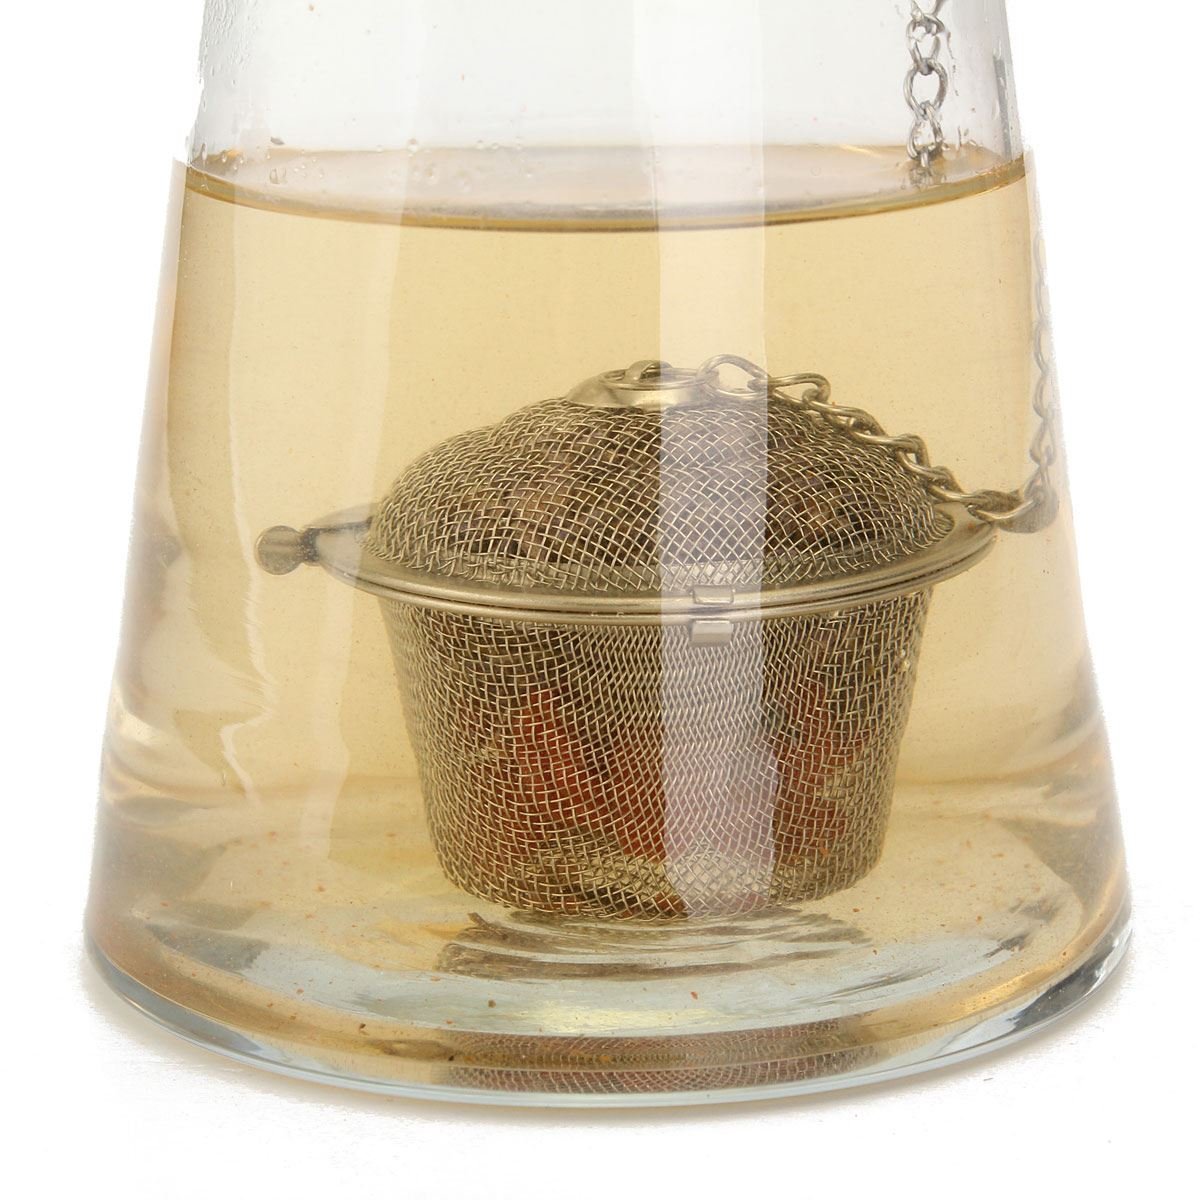 Mosaic Stainless Steel Tea Infuser Ball